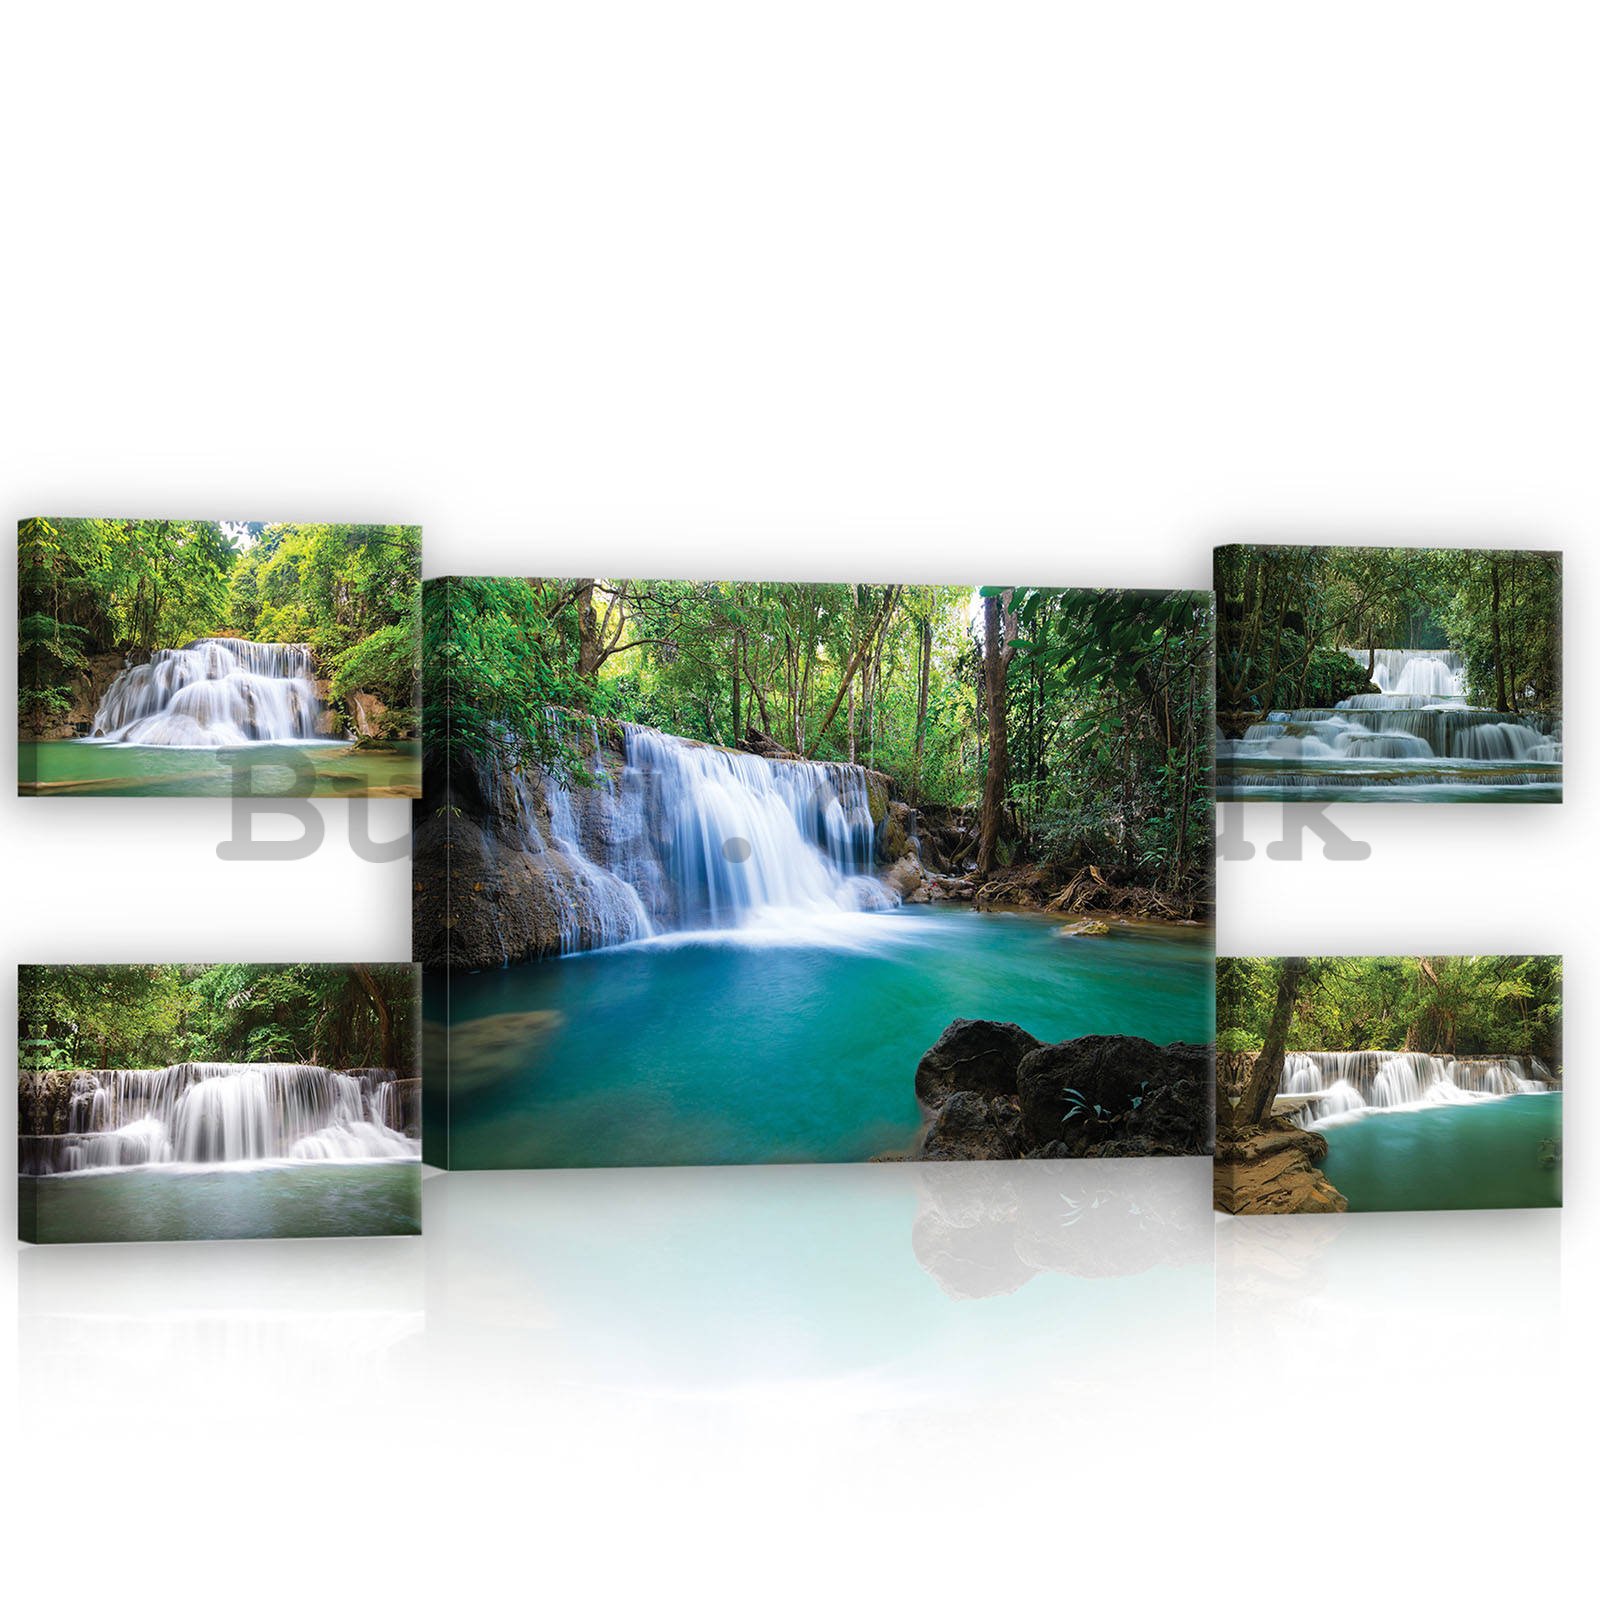 Painting on canvas: Waterfalls (2) - set 1pc 70x50 cm and 4pc 32,4x22,8 cm